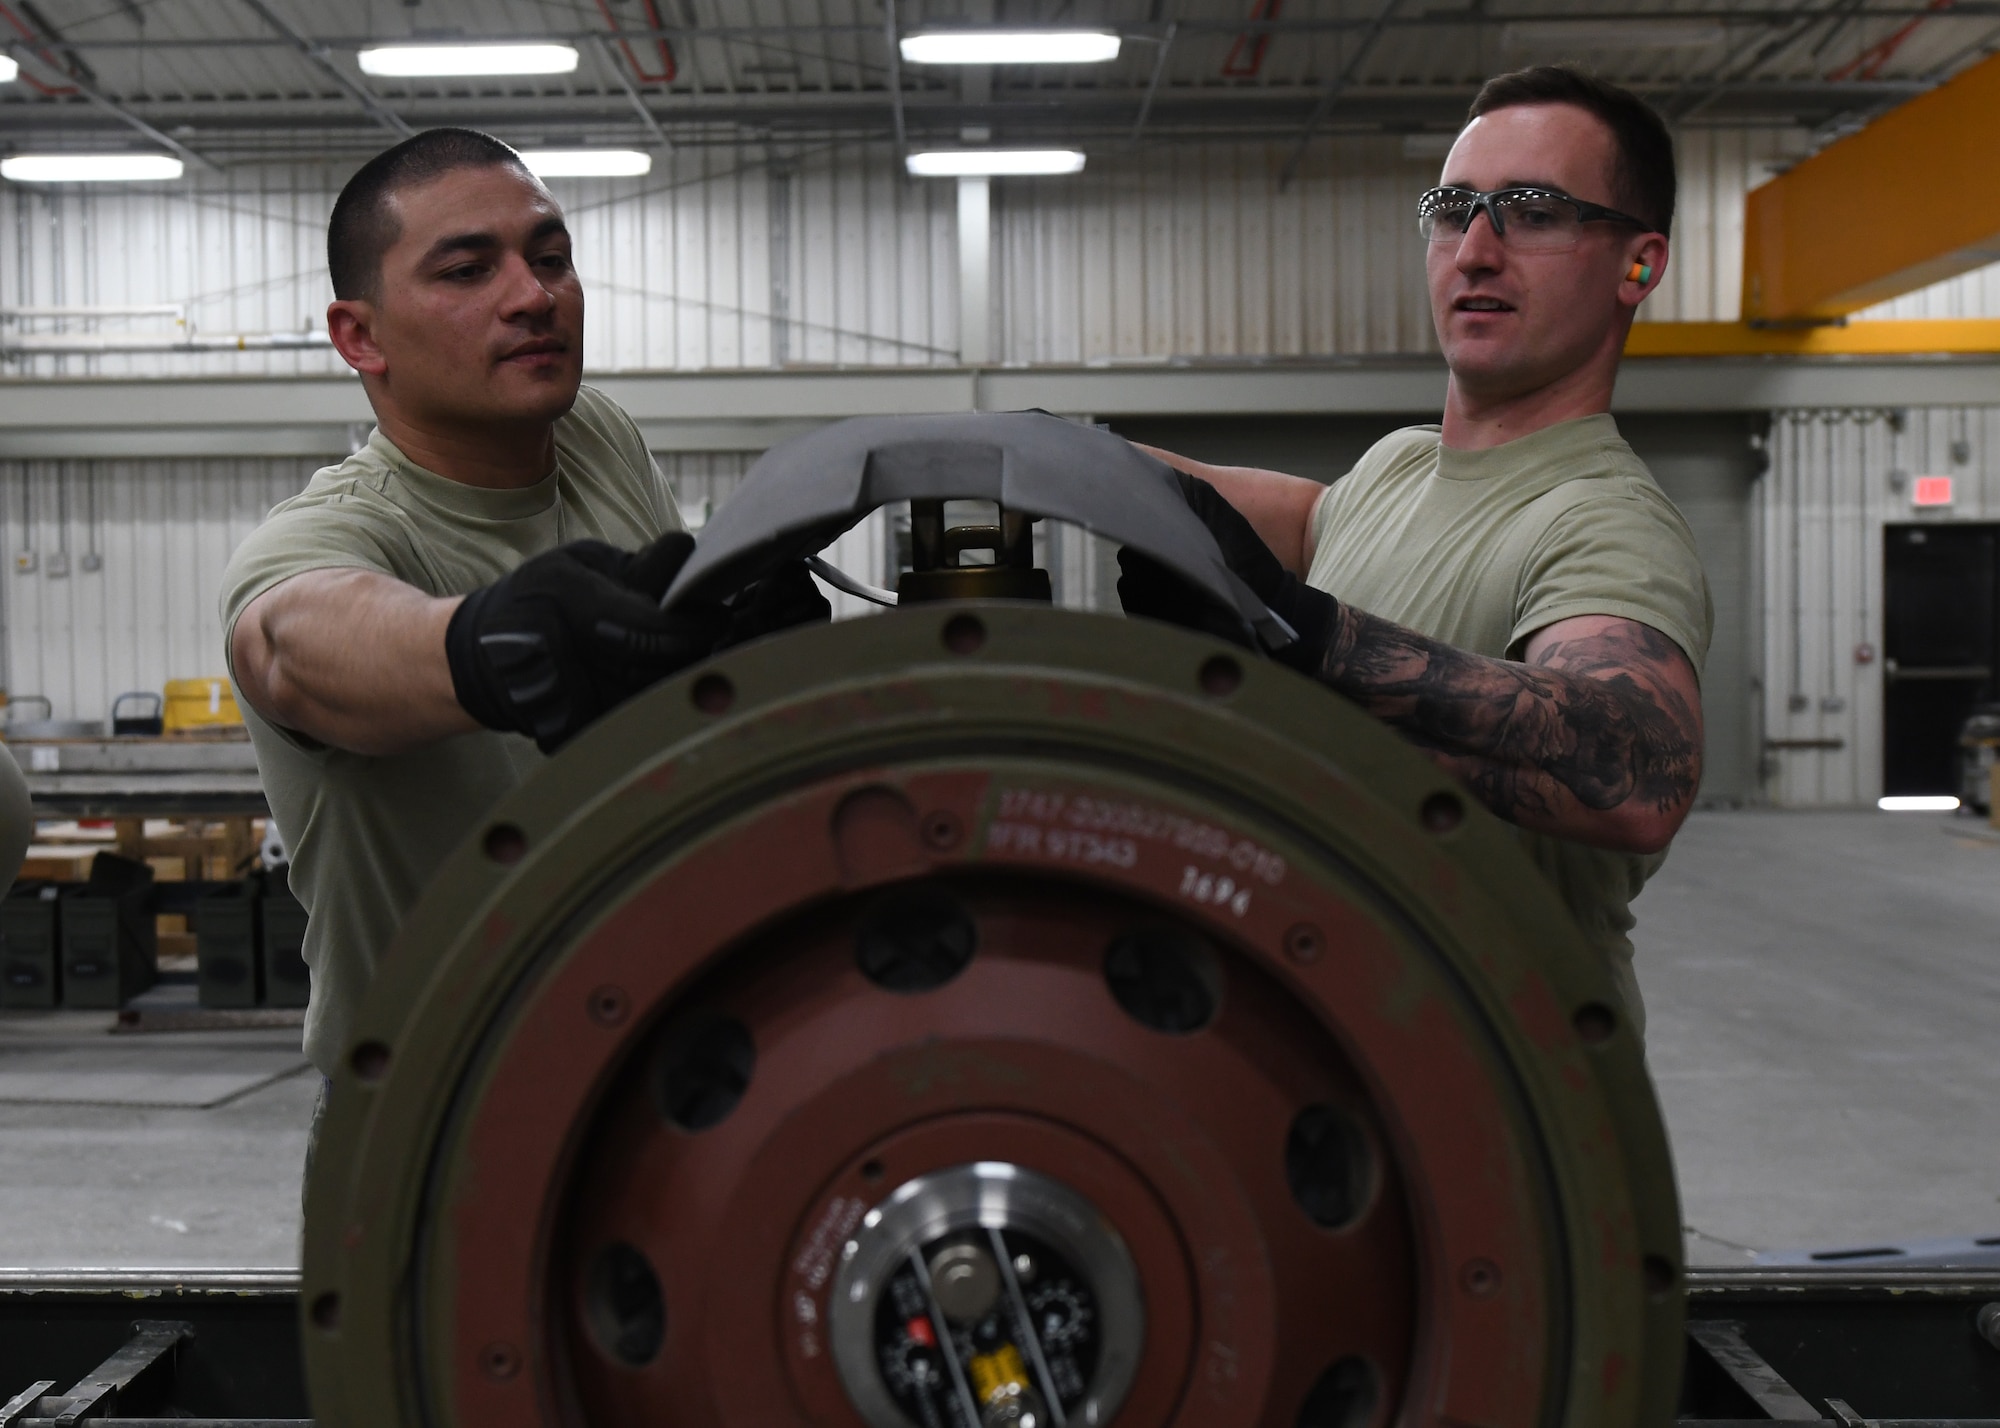 U.S. Air Force Airman 1st Class Austin Blom, left, and Staff Sgt. Woodrow Short, both ammo Airmen with the 379th Expeditionary Maintenance Squadron, attach a hardback installation to a guided bomb unit-31 at Al Udeid Air Base, Qatar, April 6, 2017. The ammo Airmen ensure that the bombs built at Al Udeid are safe and working properly through their diligent work and attentiveness to detail. (U.S. Air Force photo by Staff Sergeant Miles Wilson)